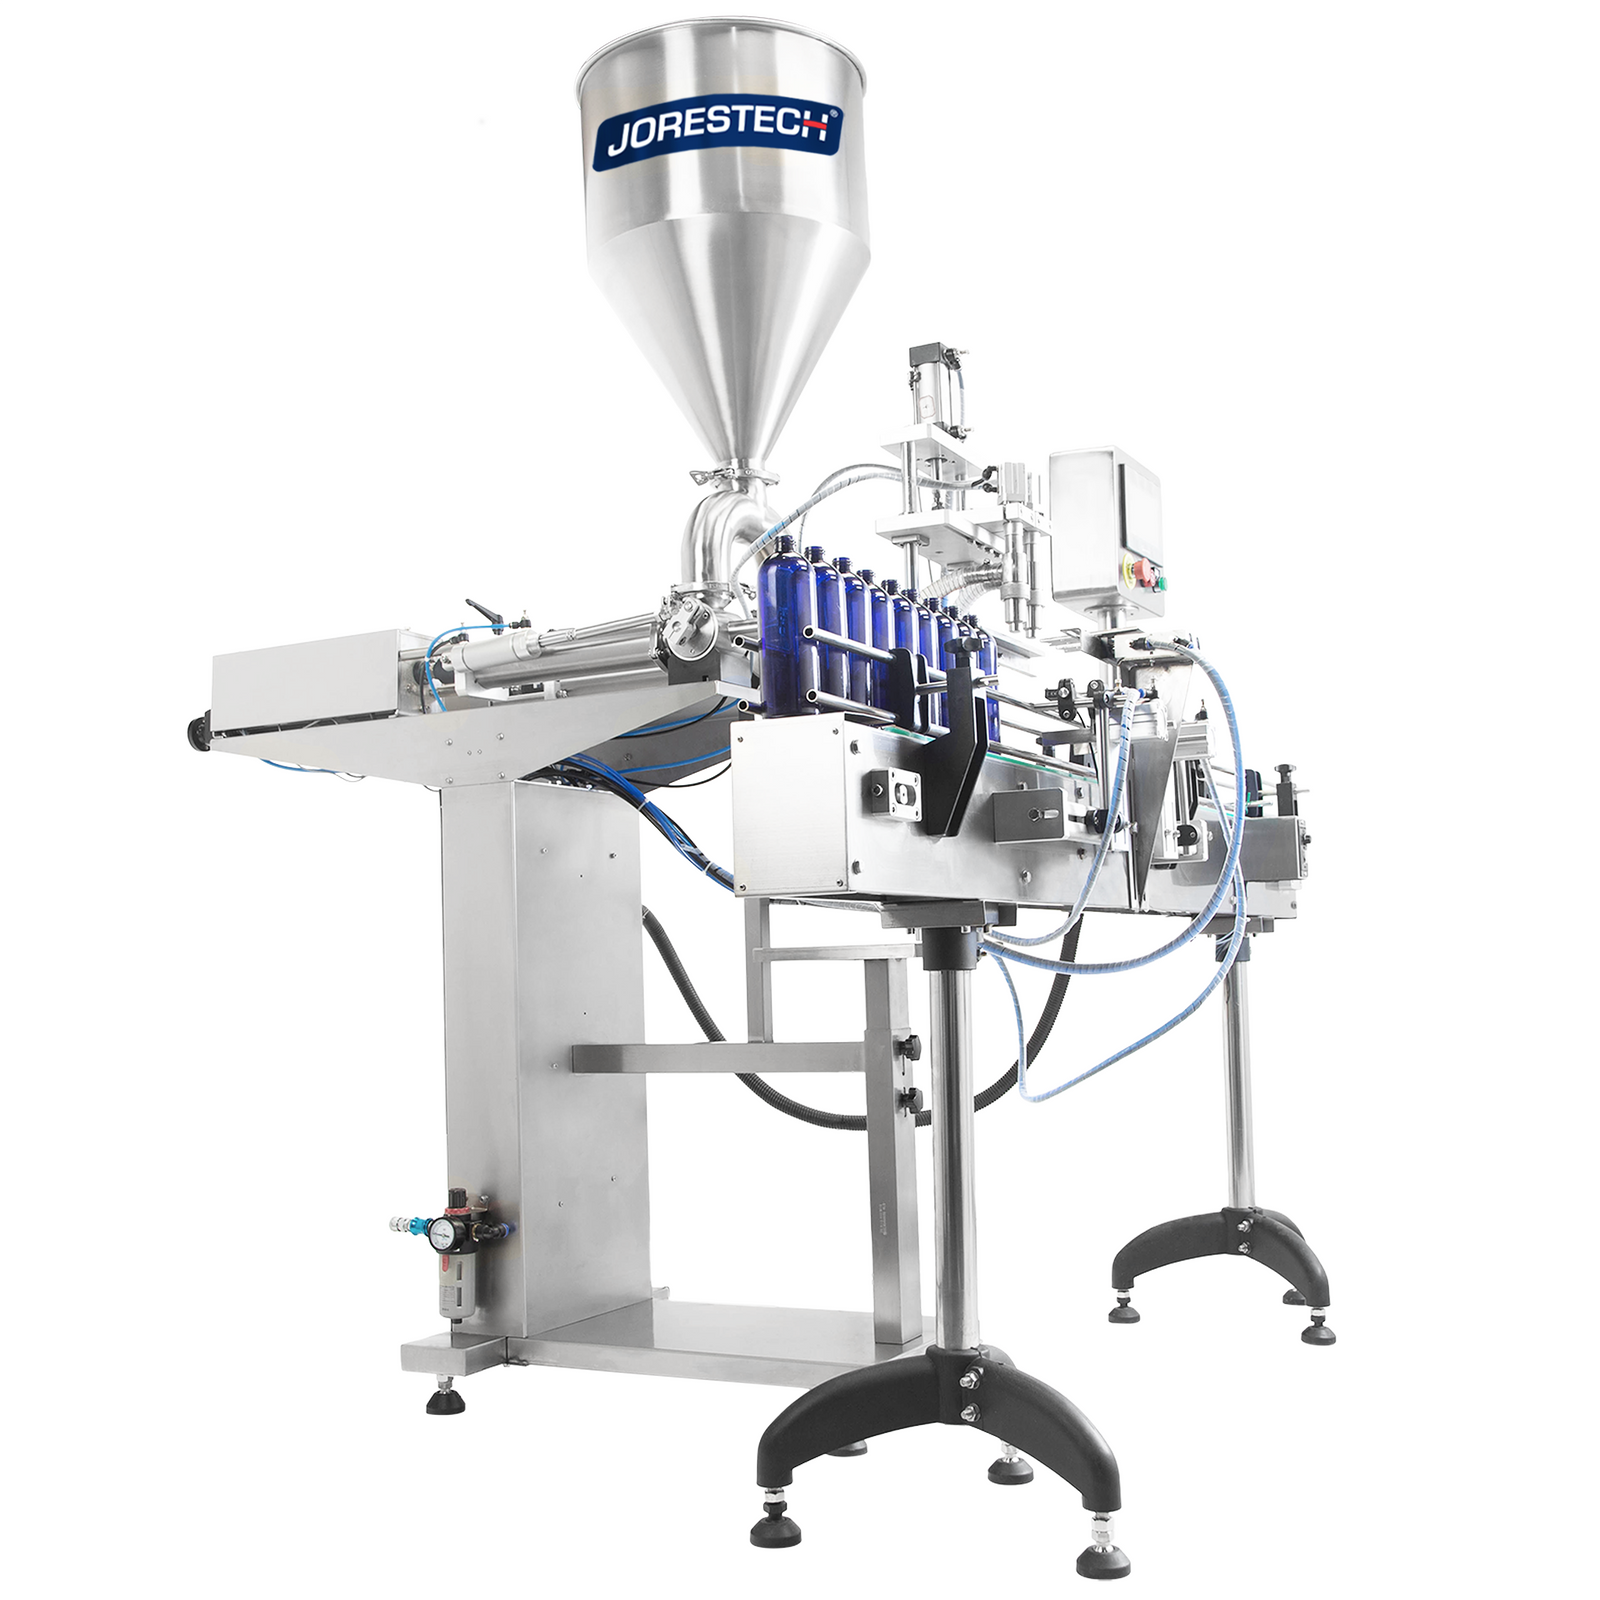 Side view of the JORES TECHNOLOGIES® automatic 2 head Piston Filler in combination with a motorized conveyor. Blue bottles are positioned on top of the conveyor and are being filled with a liquid